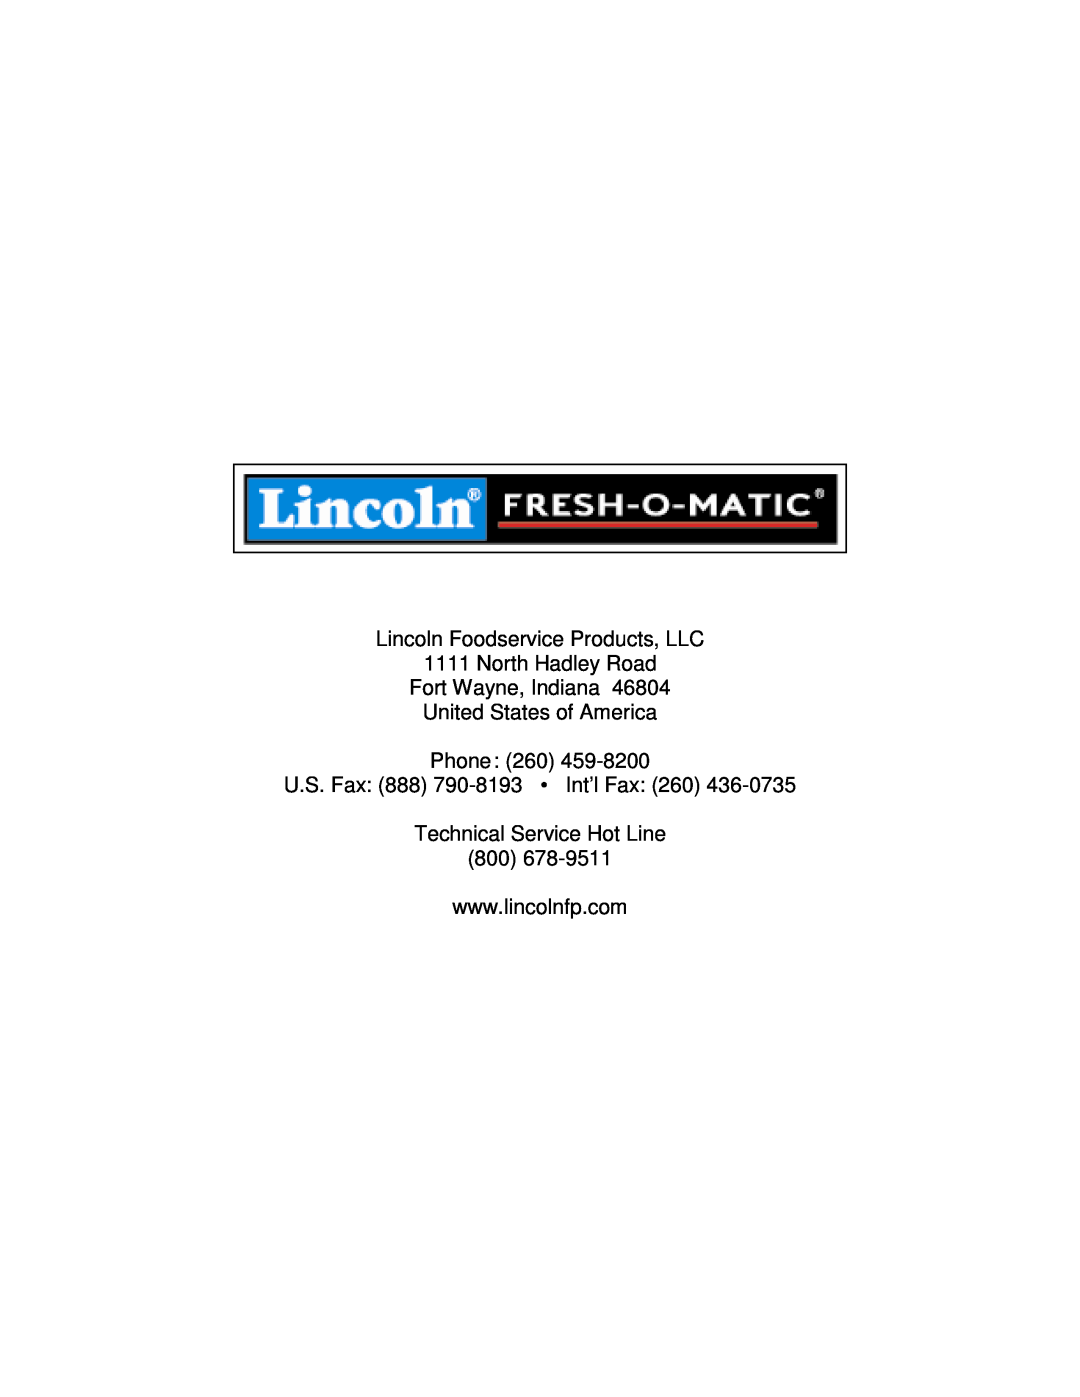 Lincoln MODEL 4000 SERIES manual Lincoln Foodservice Products, LLC, North Hadley Road Fort Wayne, Indiana 